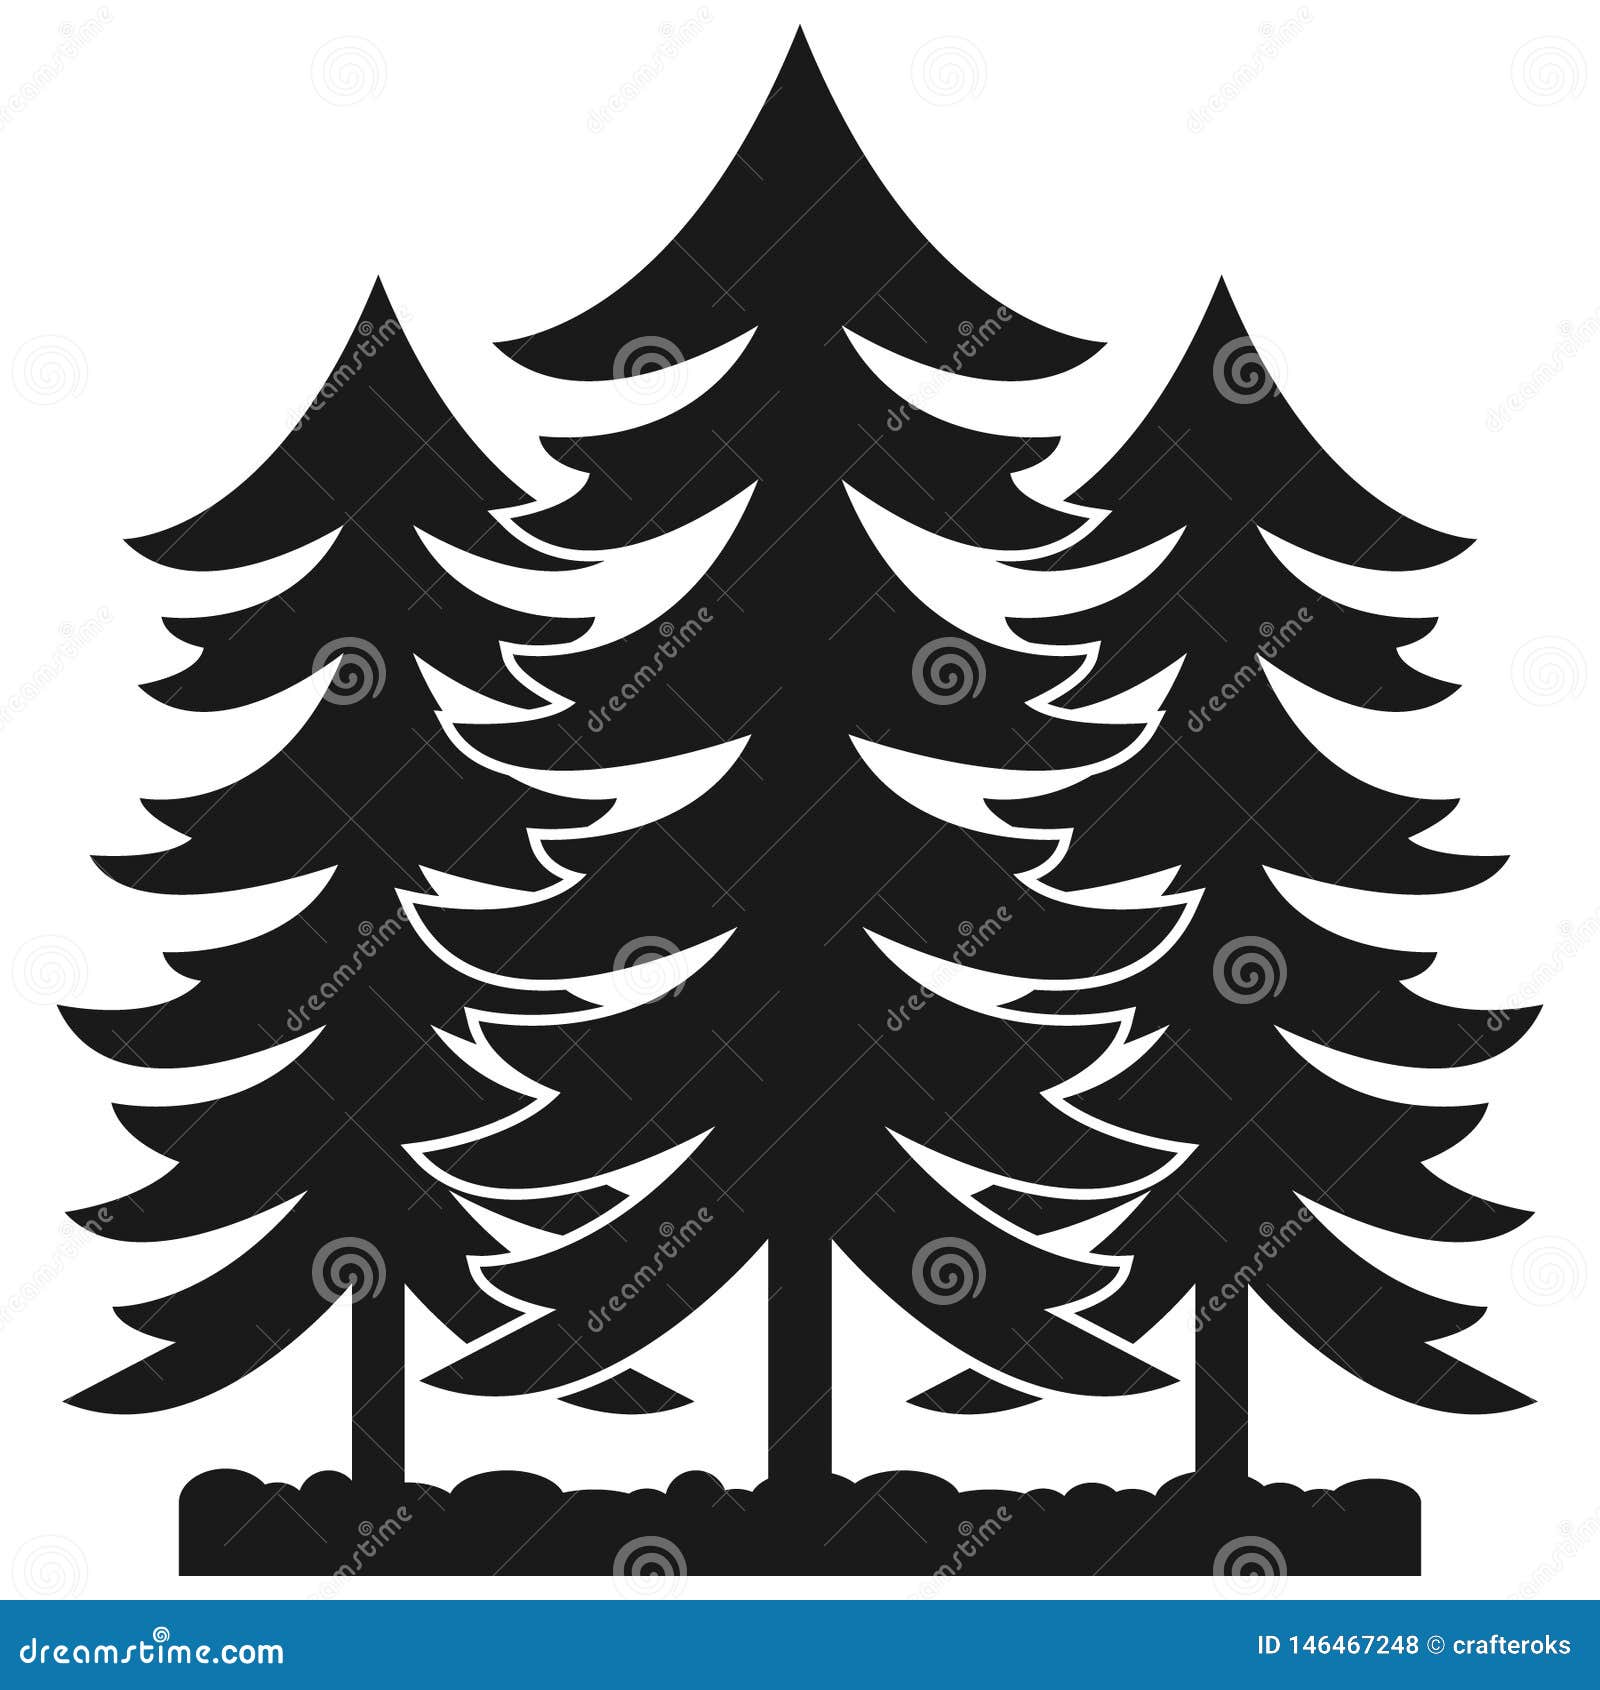 Forest Vector Epshand Drawn Crafteroks Svg Free Free Svg File Eps Dxf Vector Logo Silhouette Icon Instant Download Dig Stock Vector Illustration Of Cutting Hand 146467248